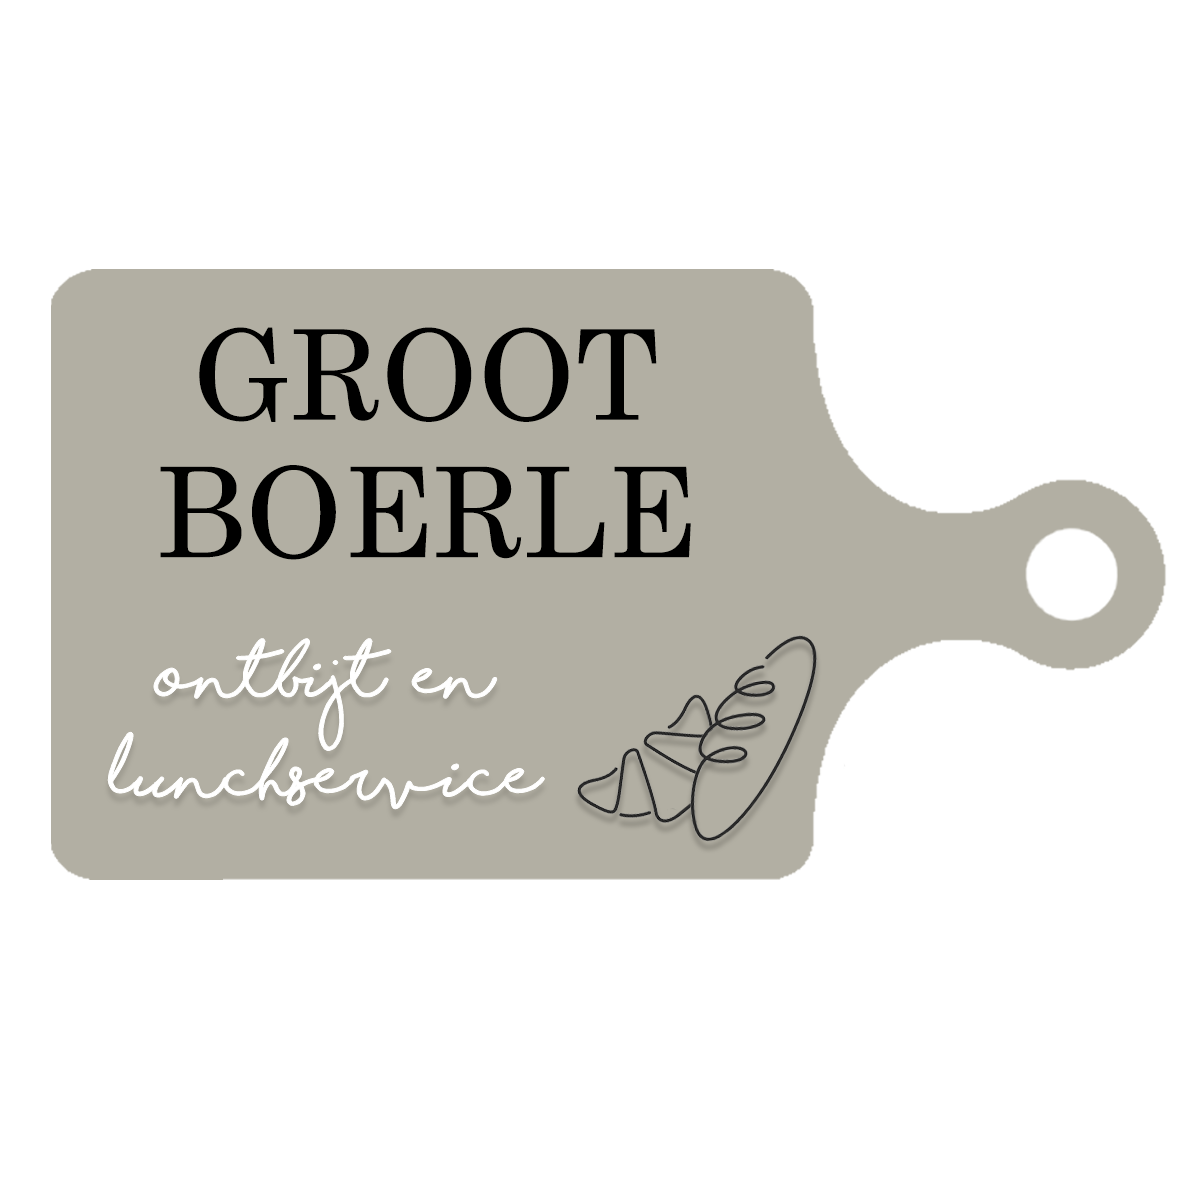 GrootBoerle Ontbijt & Lunch service